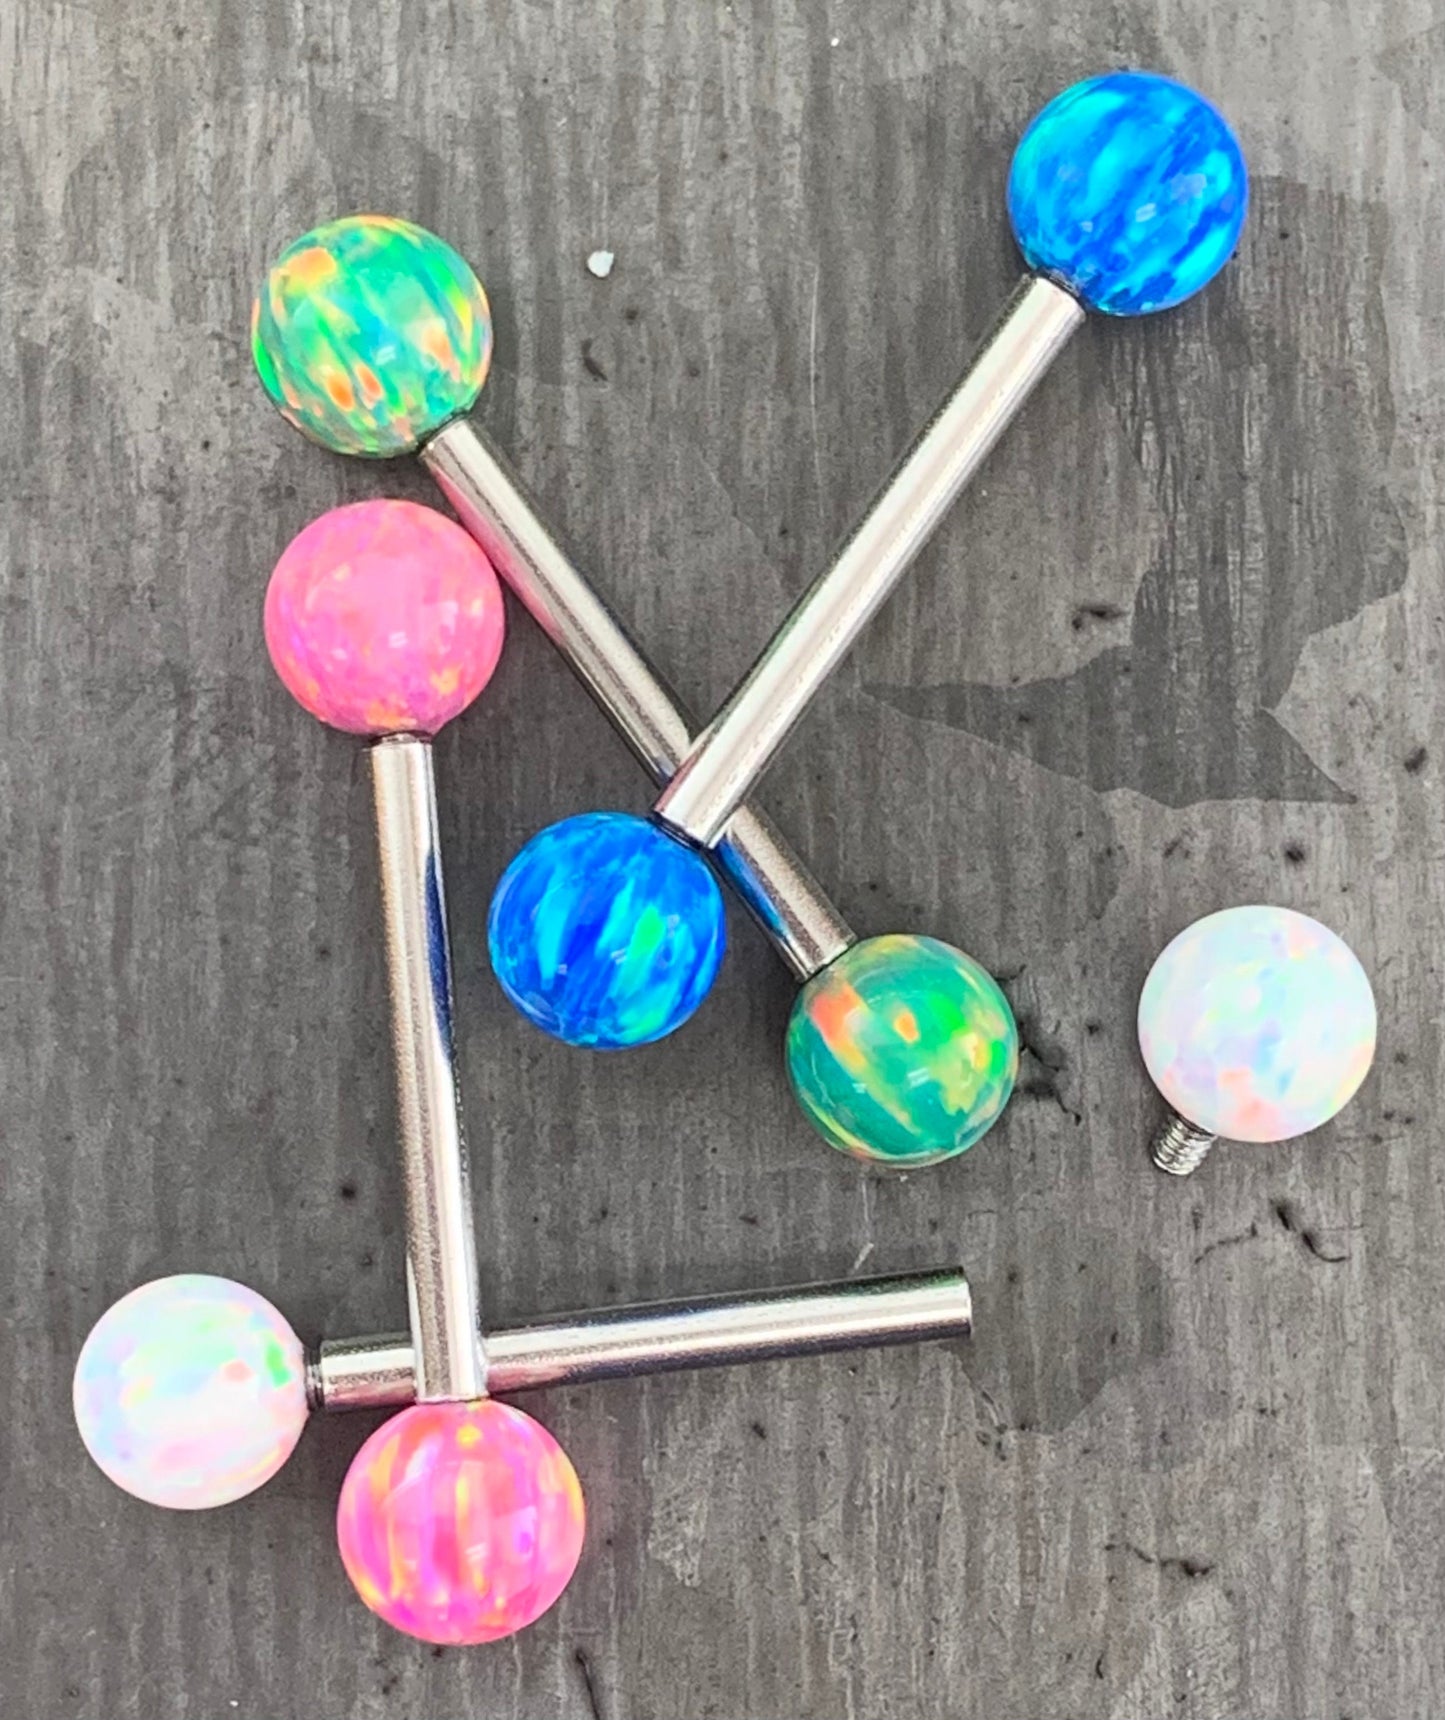 1 Piece or 1 Pair Beautiful Internally Threaded Opal Balls Nipple/Tongue Ring - Barbell 9/16"(14mm) - Blue, Green, Pink and White Available!